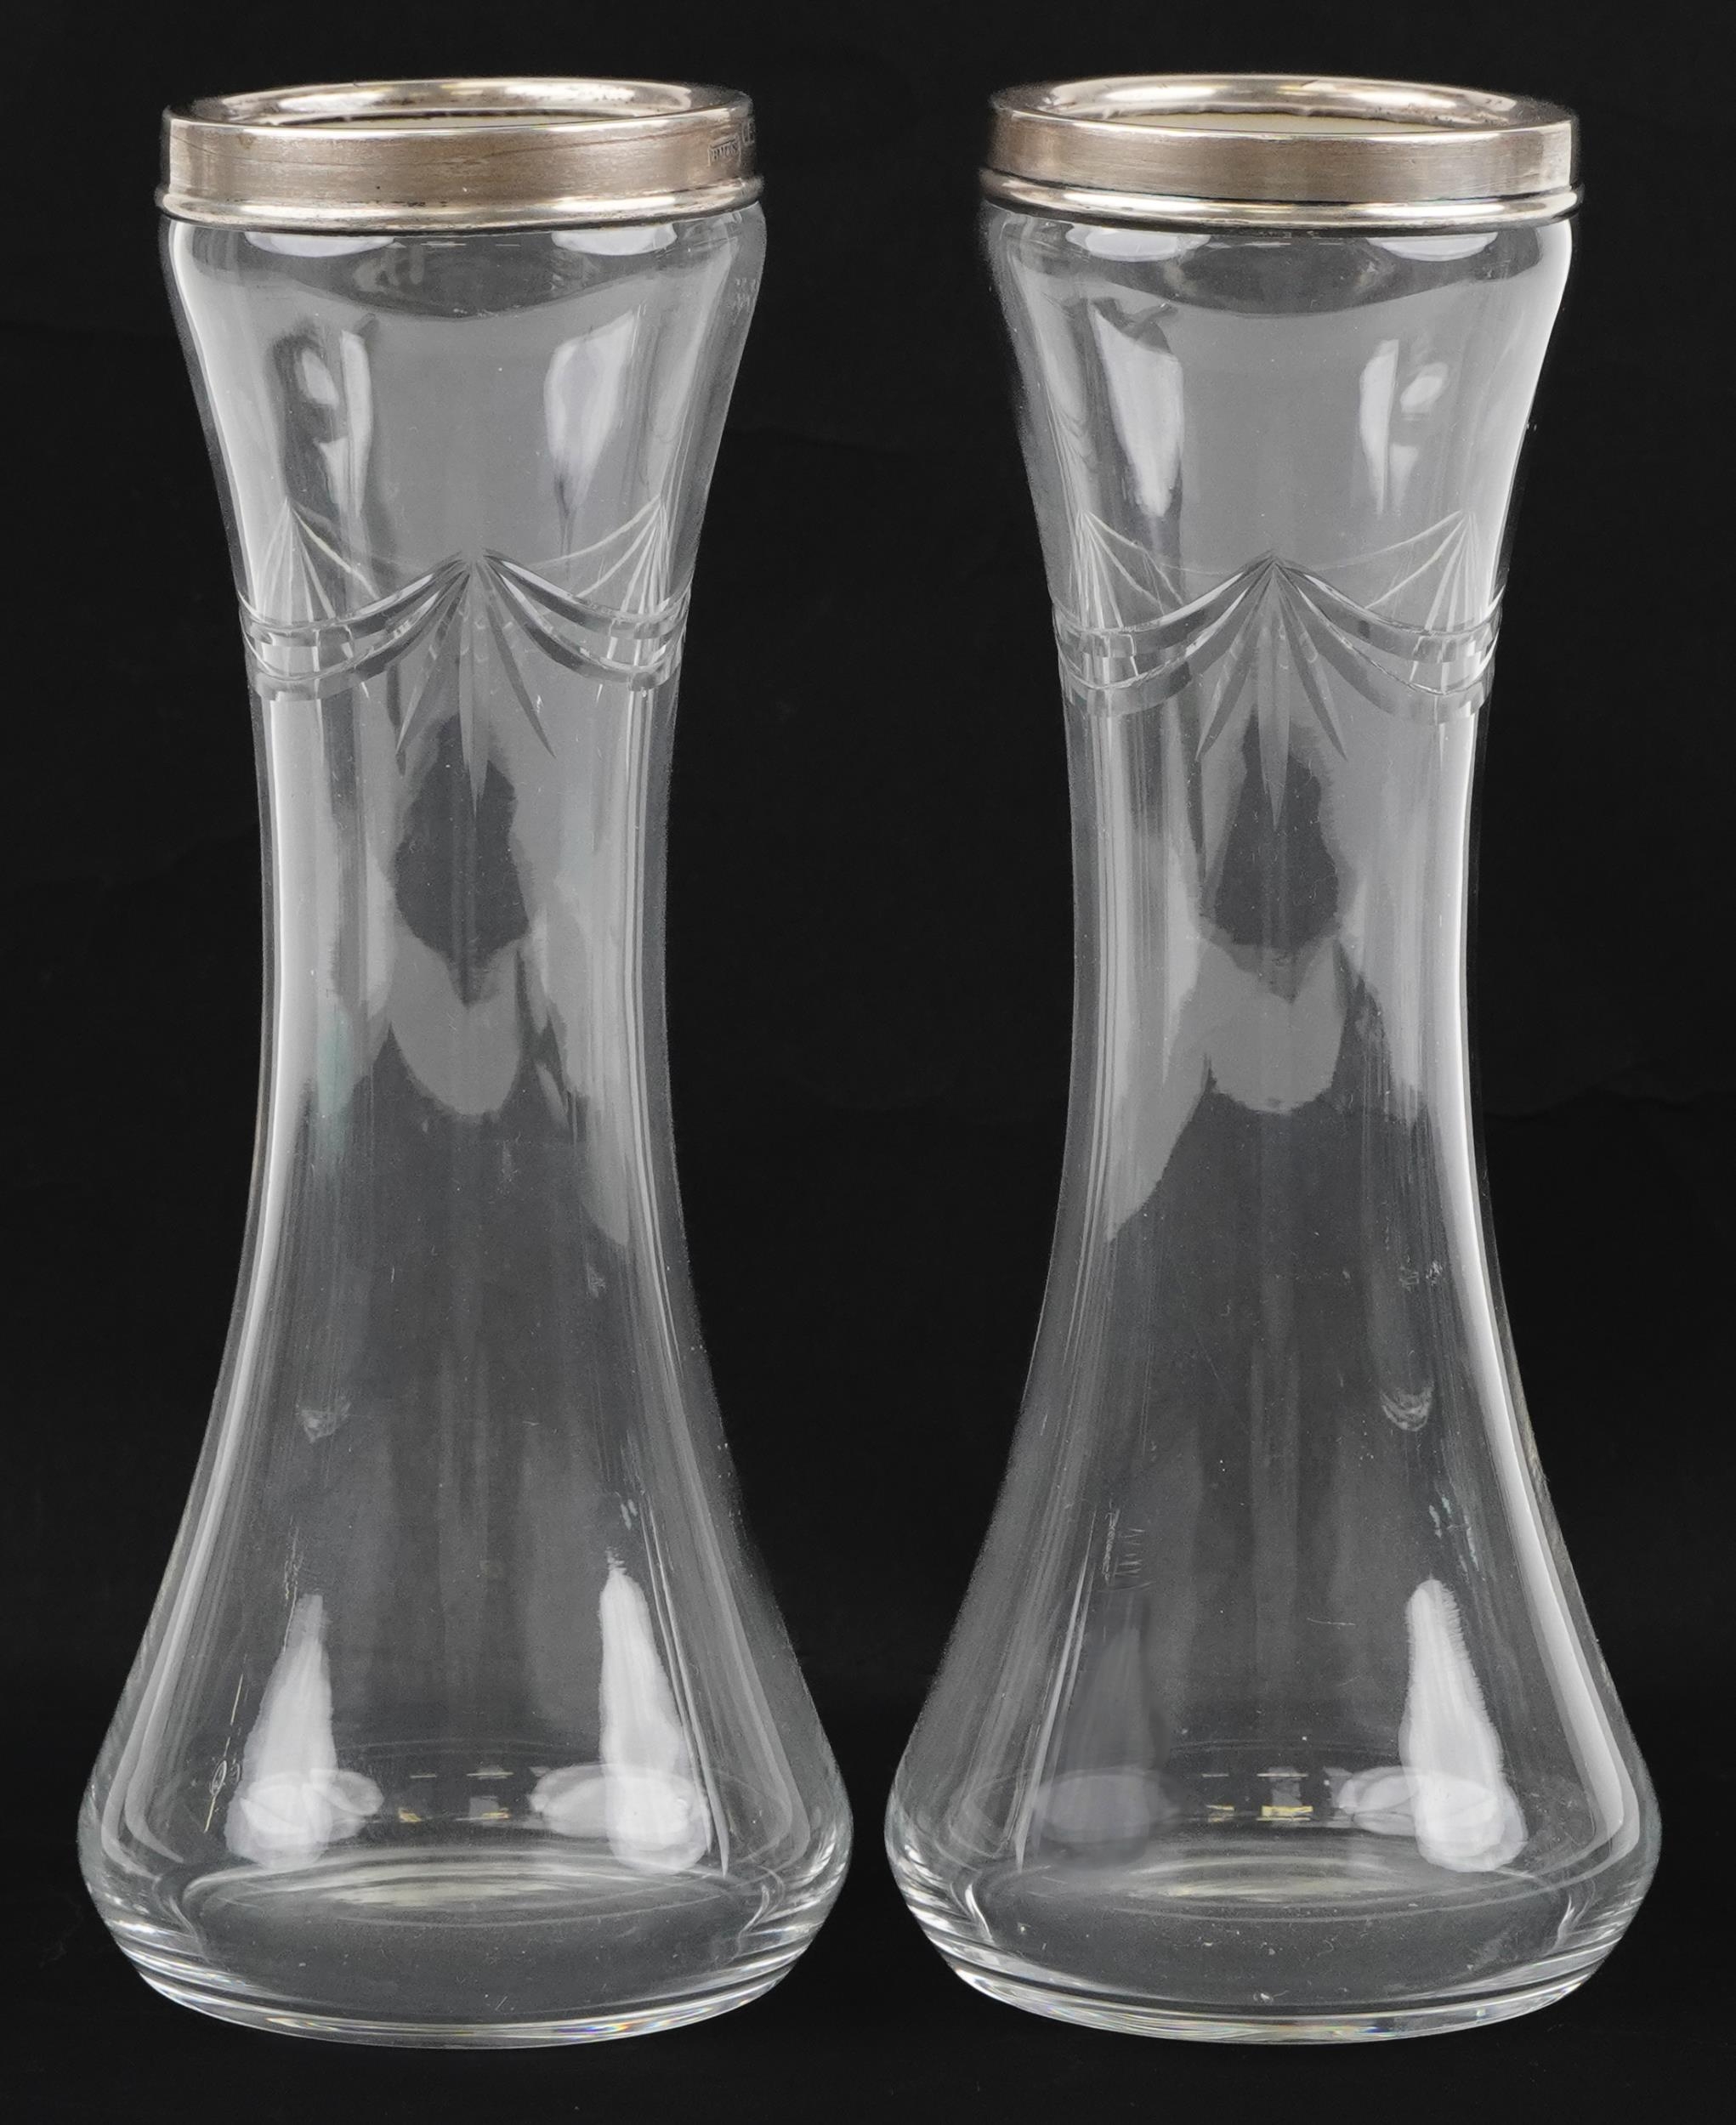 Pair of George V etched glass vases with silver collars, B M & Co maker's mark, London 1927, 20.